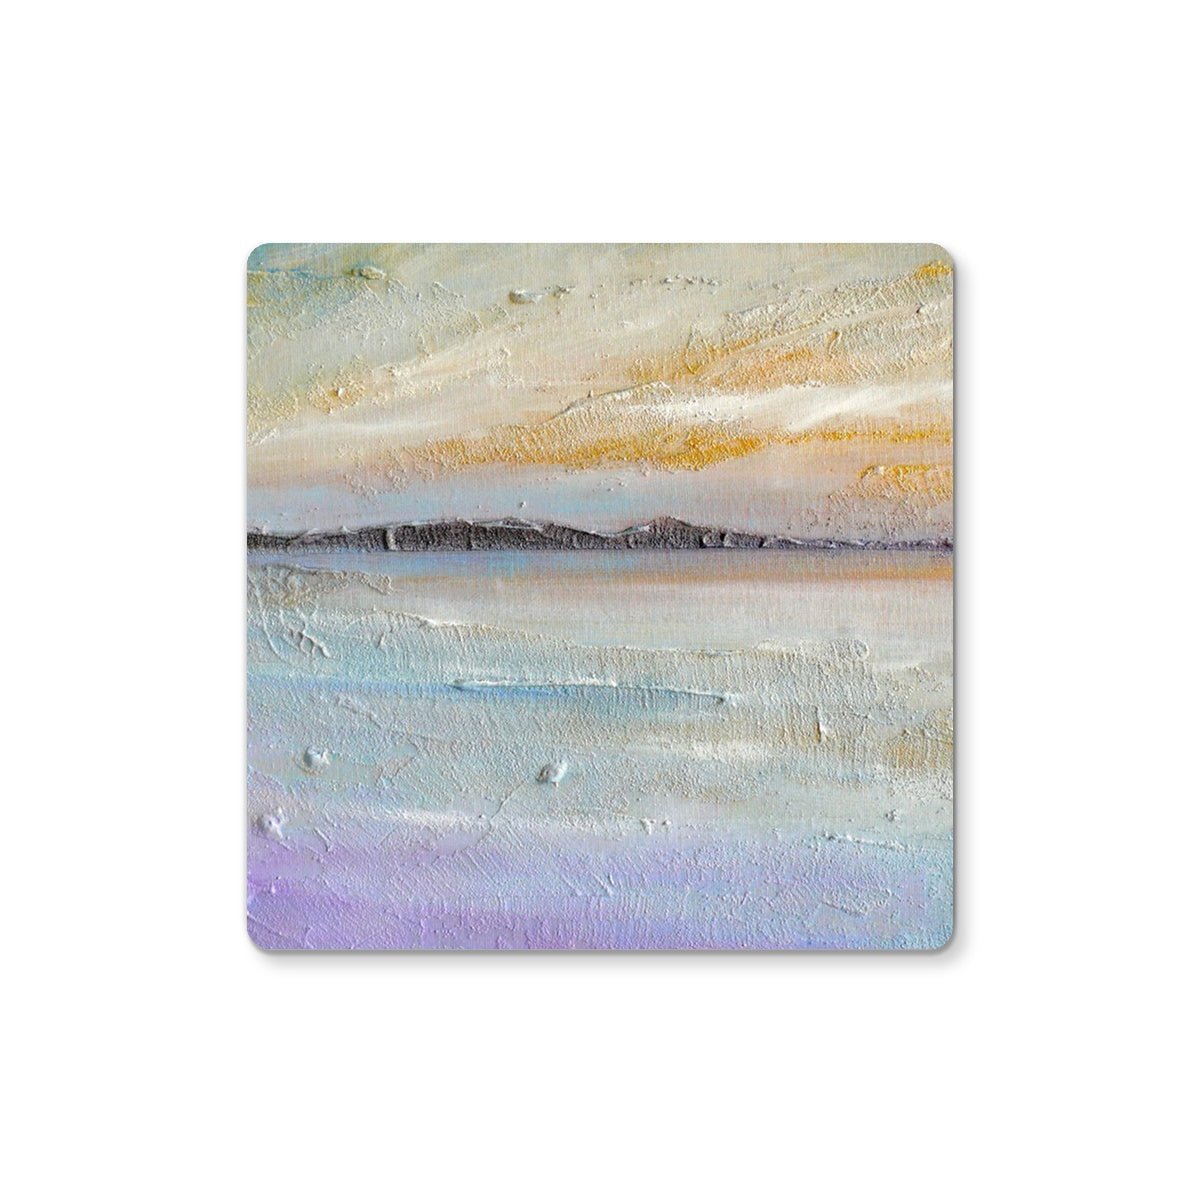 Sollas Beach South Uist Art Gifts Coaster-Coasters-Hebridean Islands Art Gallery-4 Coasters-Paintings, Prints, Homeware, Art Gifts From Scotland By Scottish Artist Kevin Hunter